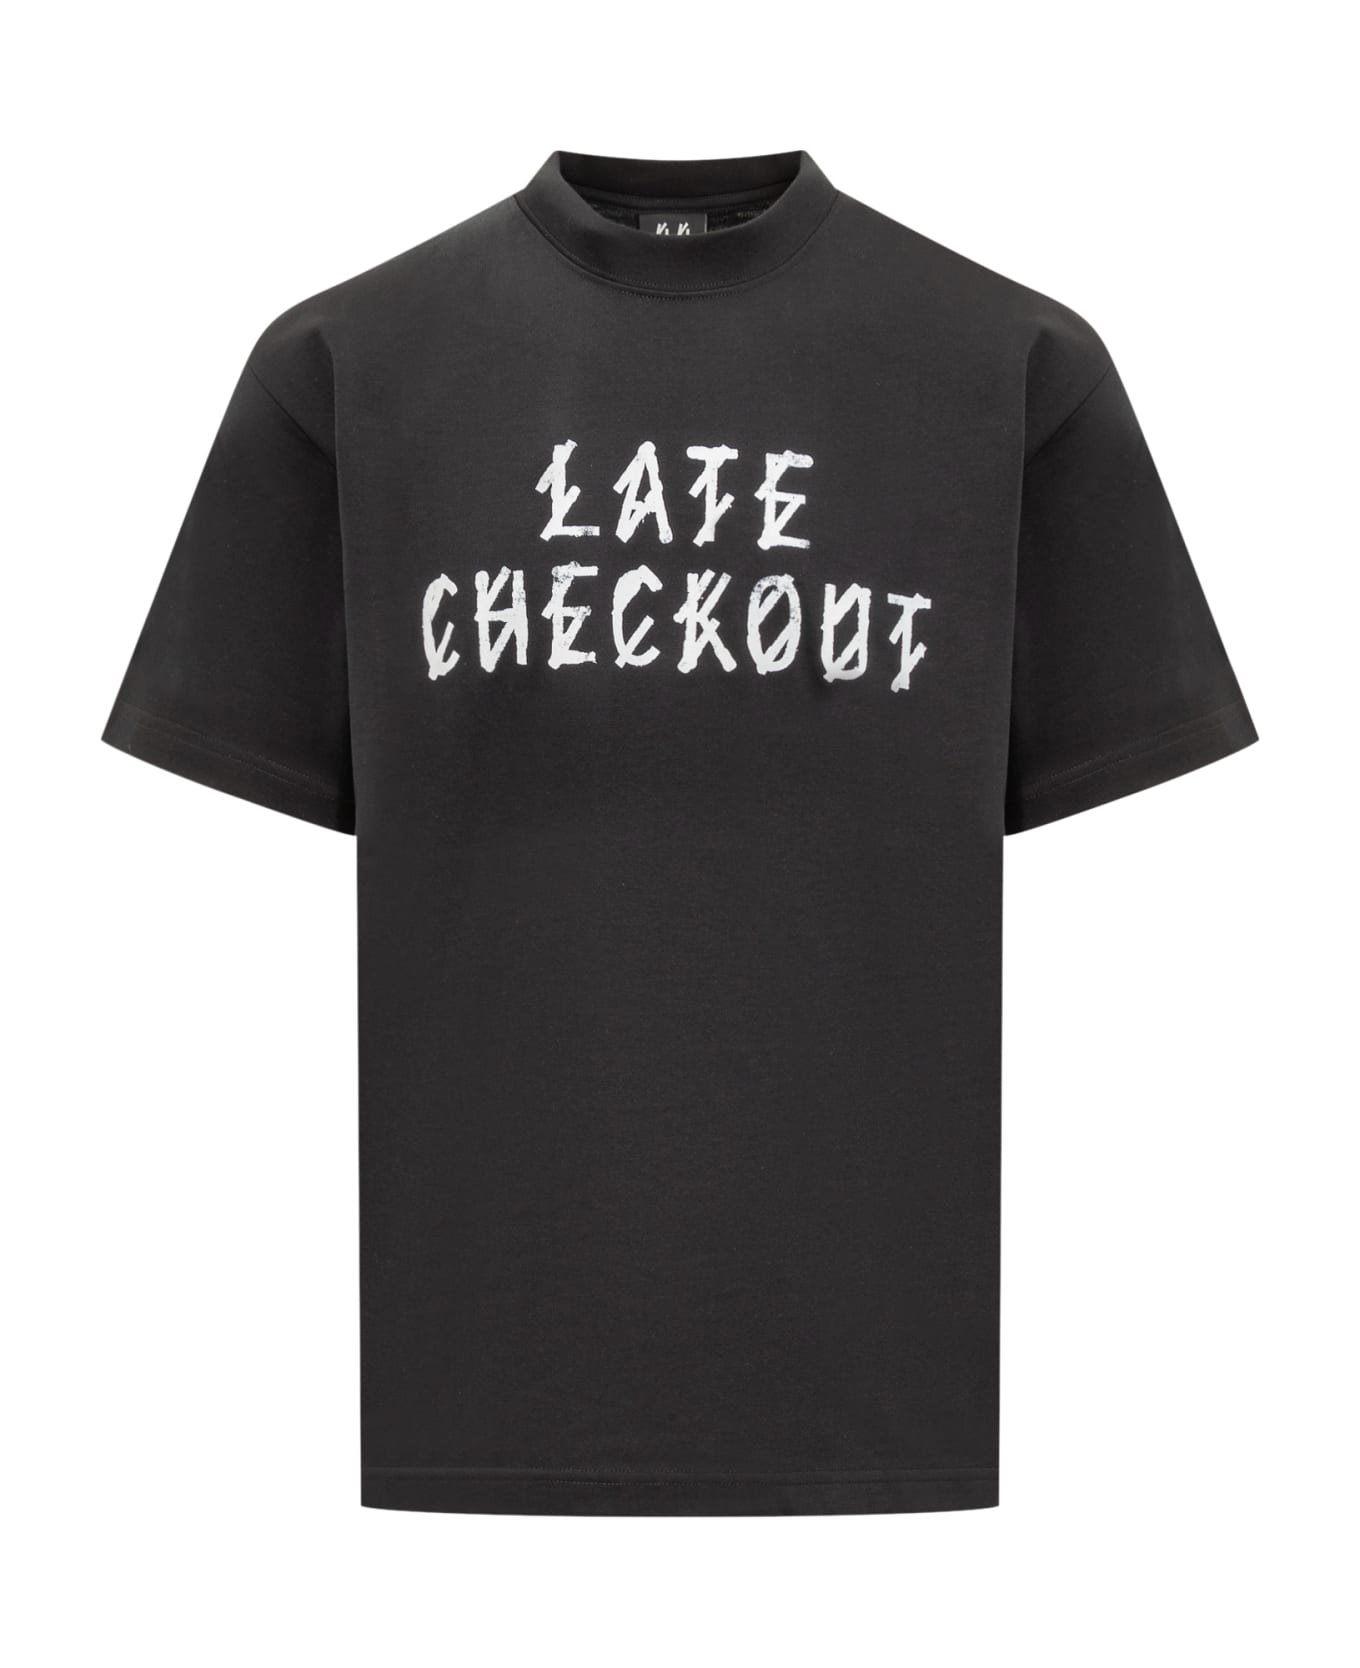 44 Label Group T-shirt With Room 44 Print - BLACK-LATE CHECKOUT シャツ